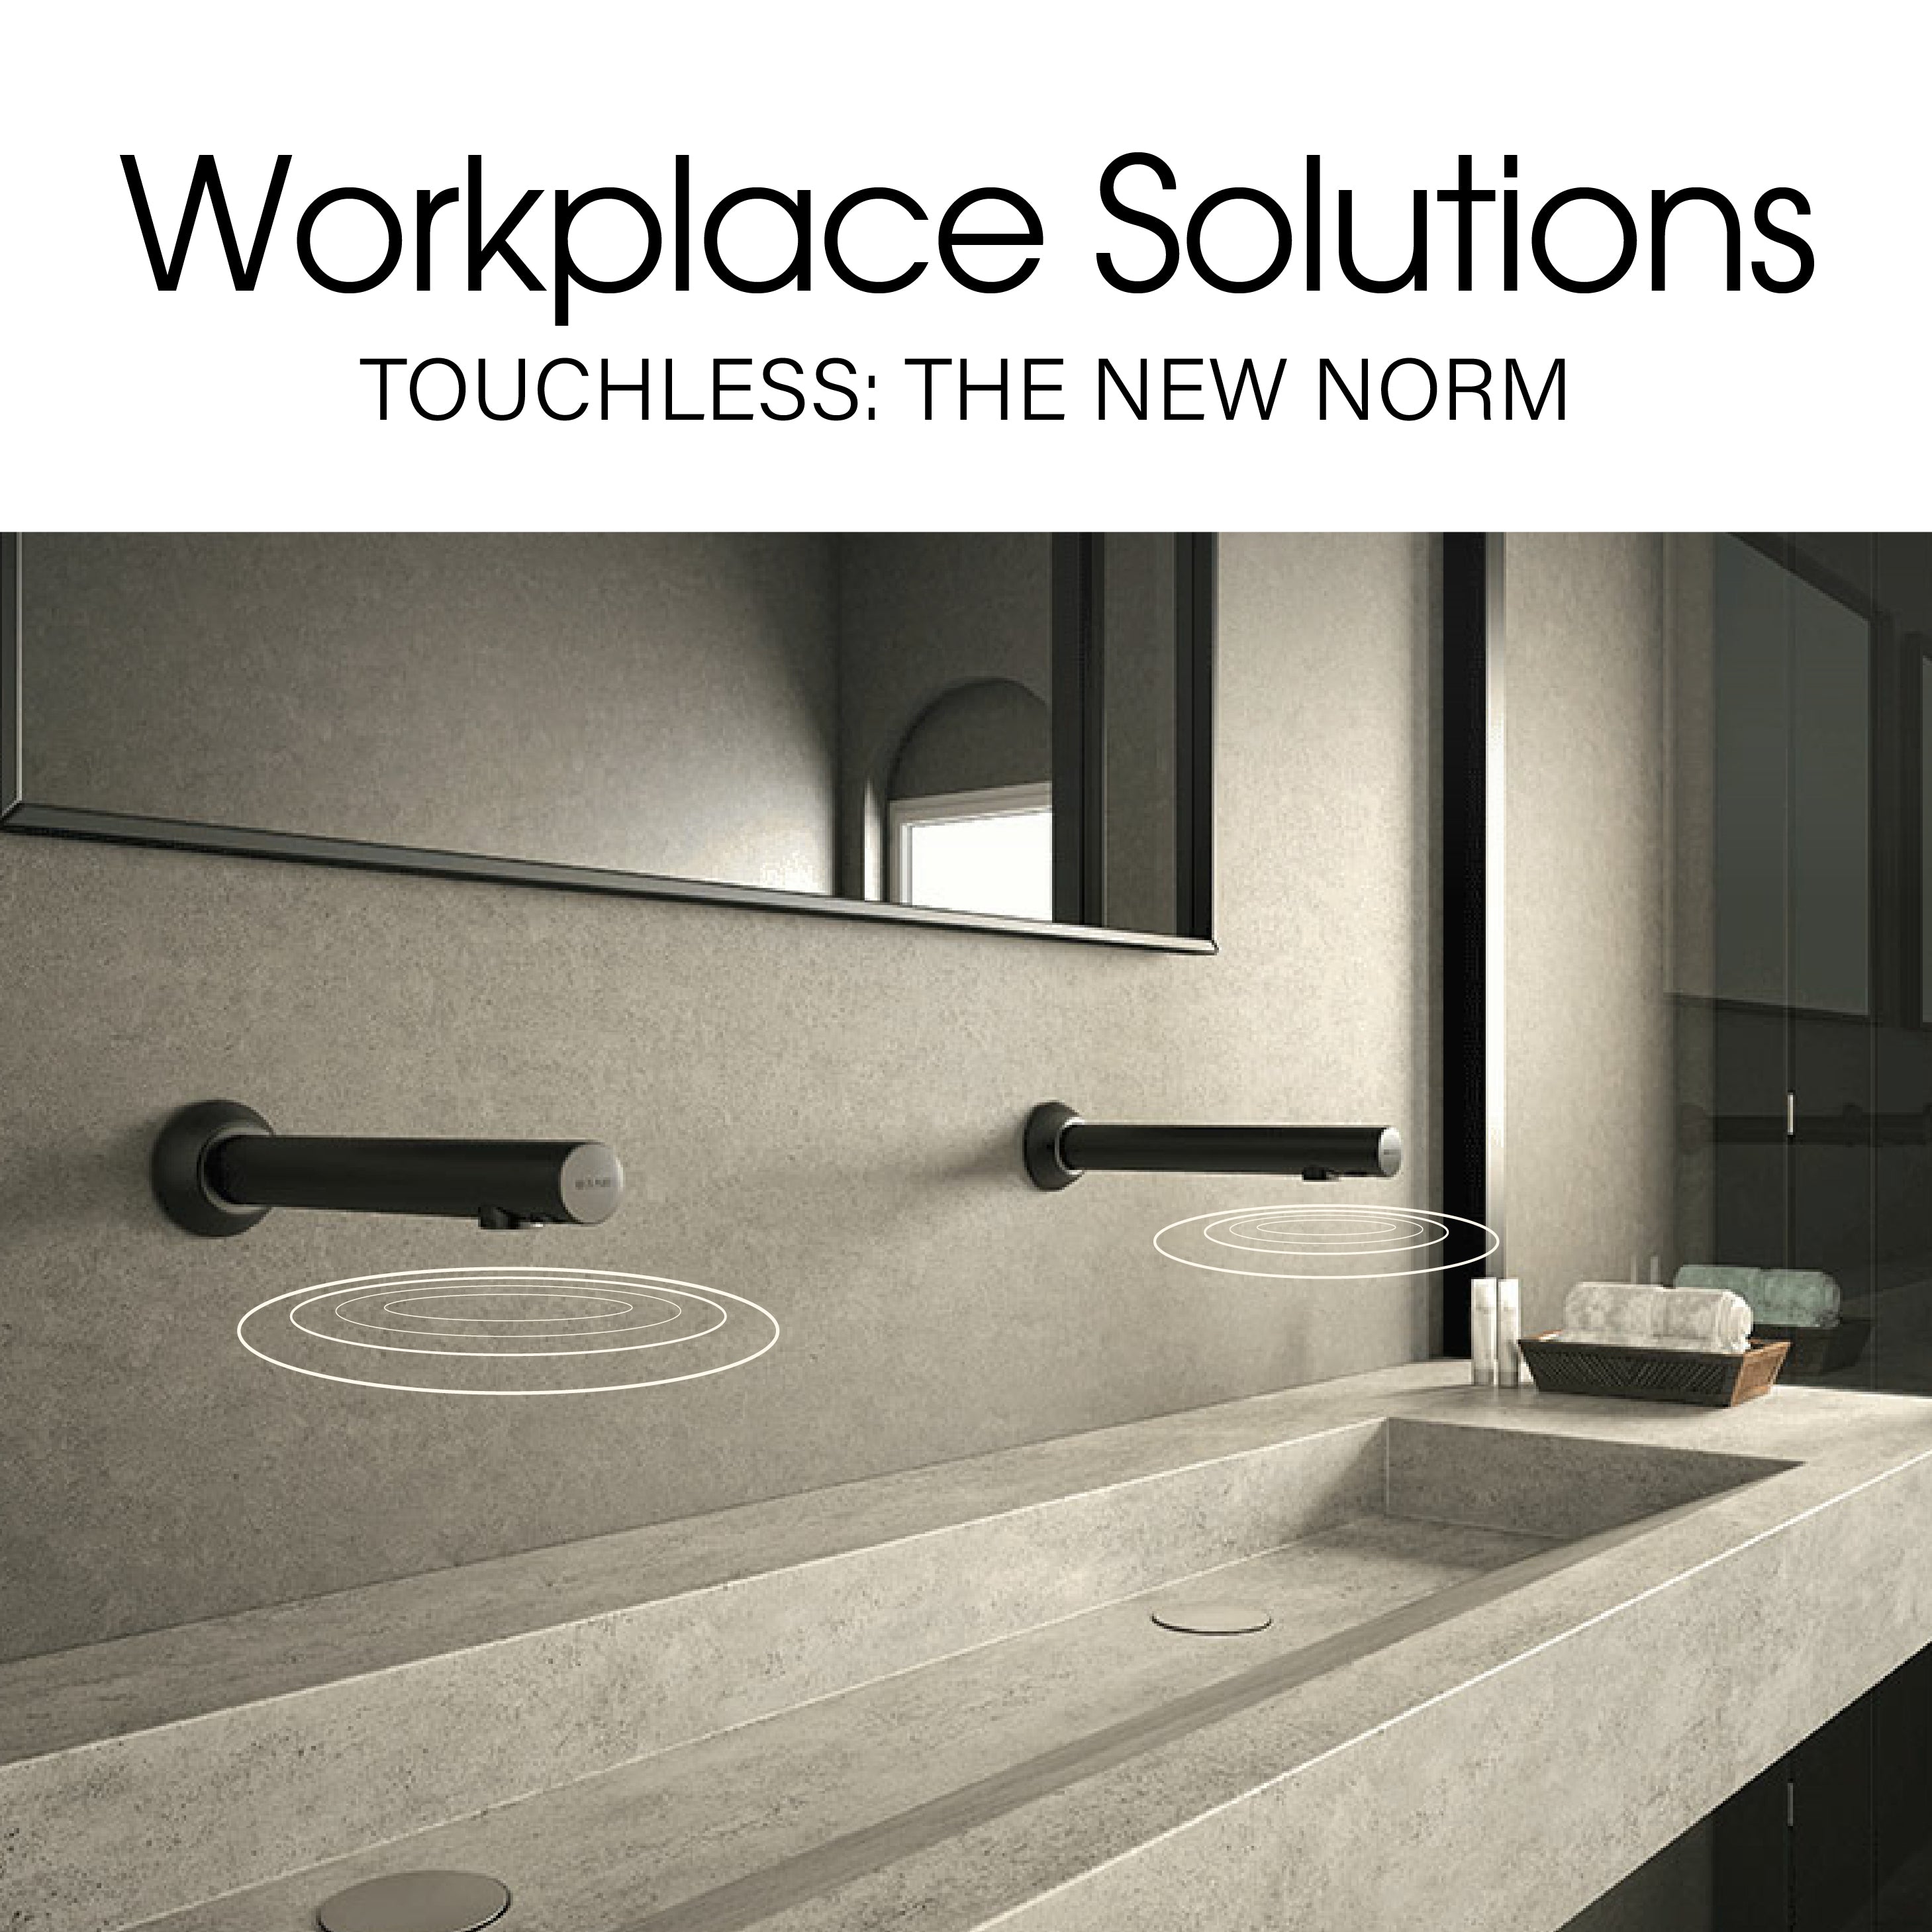 Workplace Solutions I Touchless: The New Norm